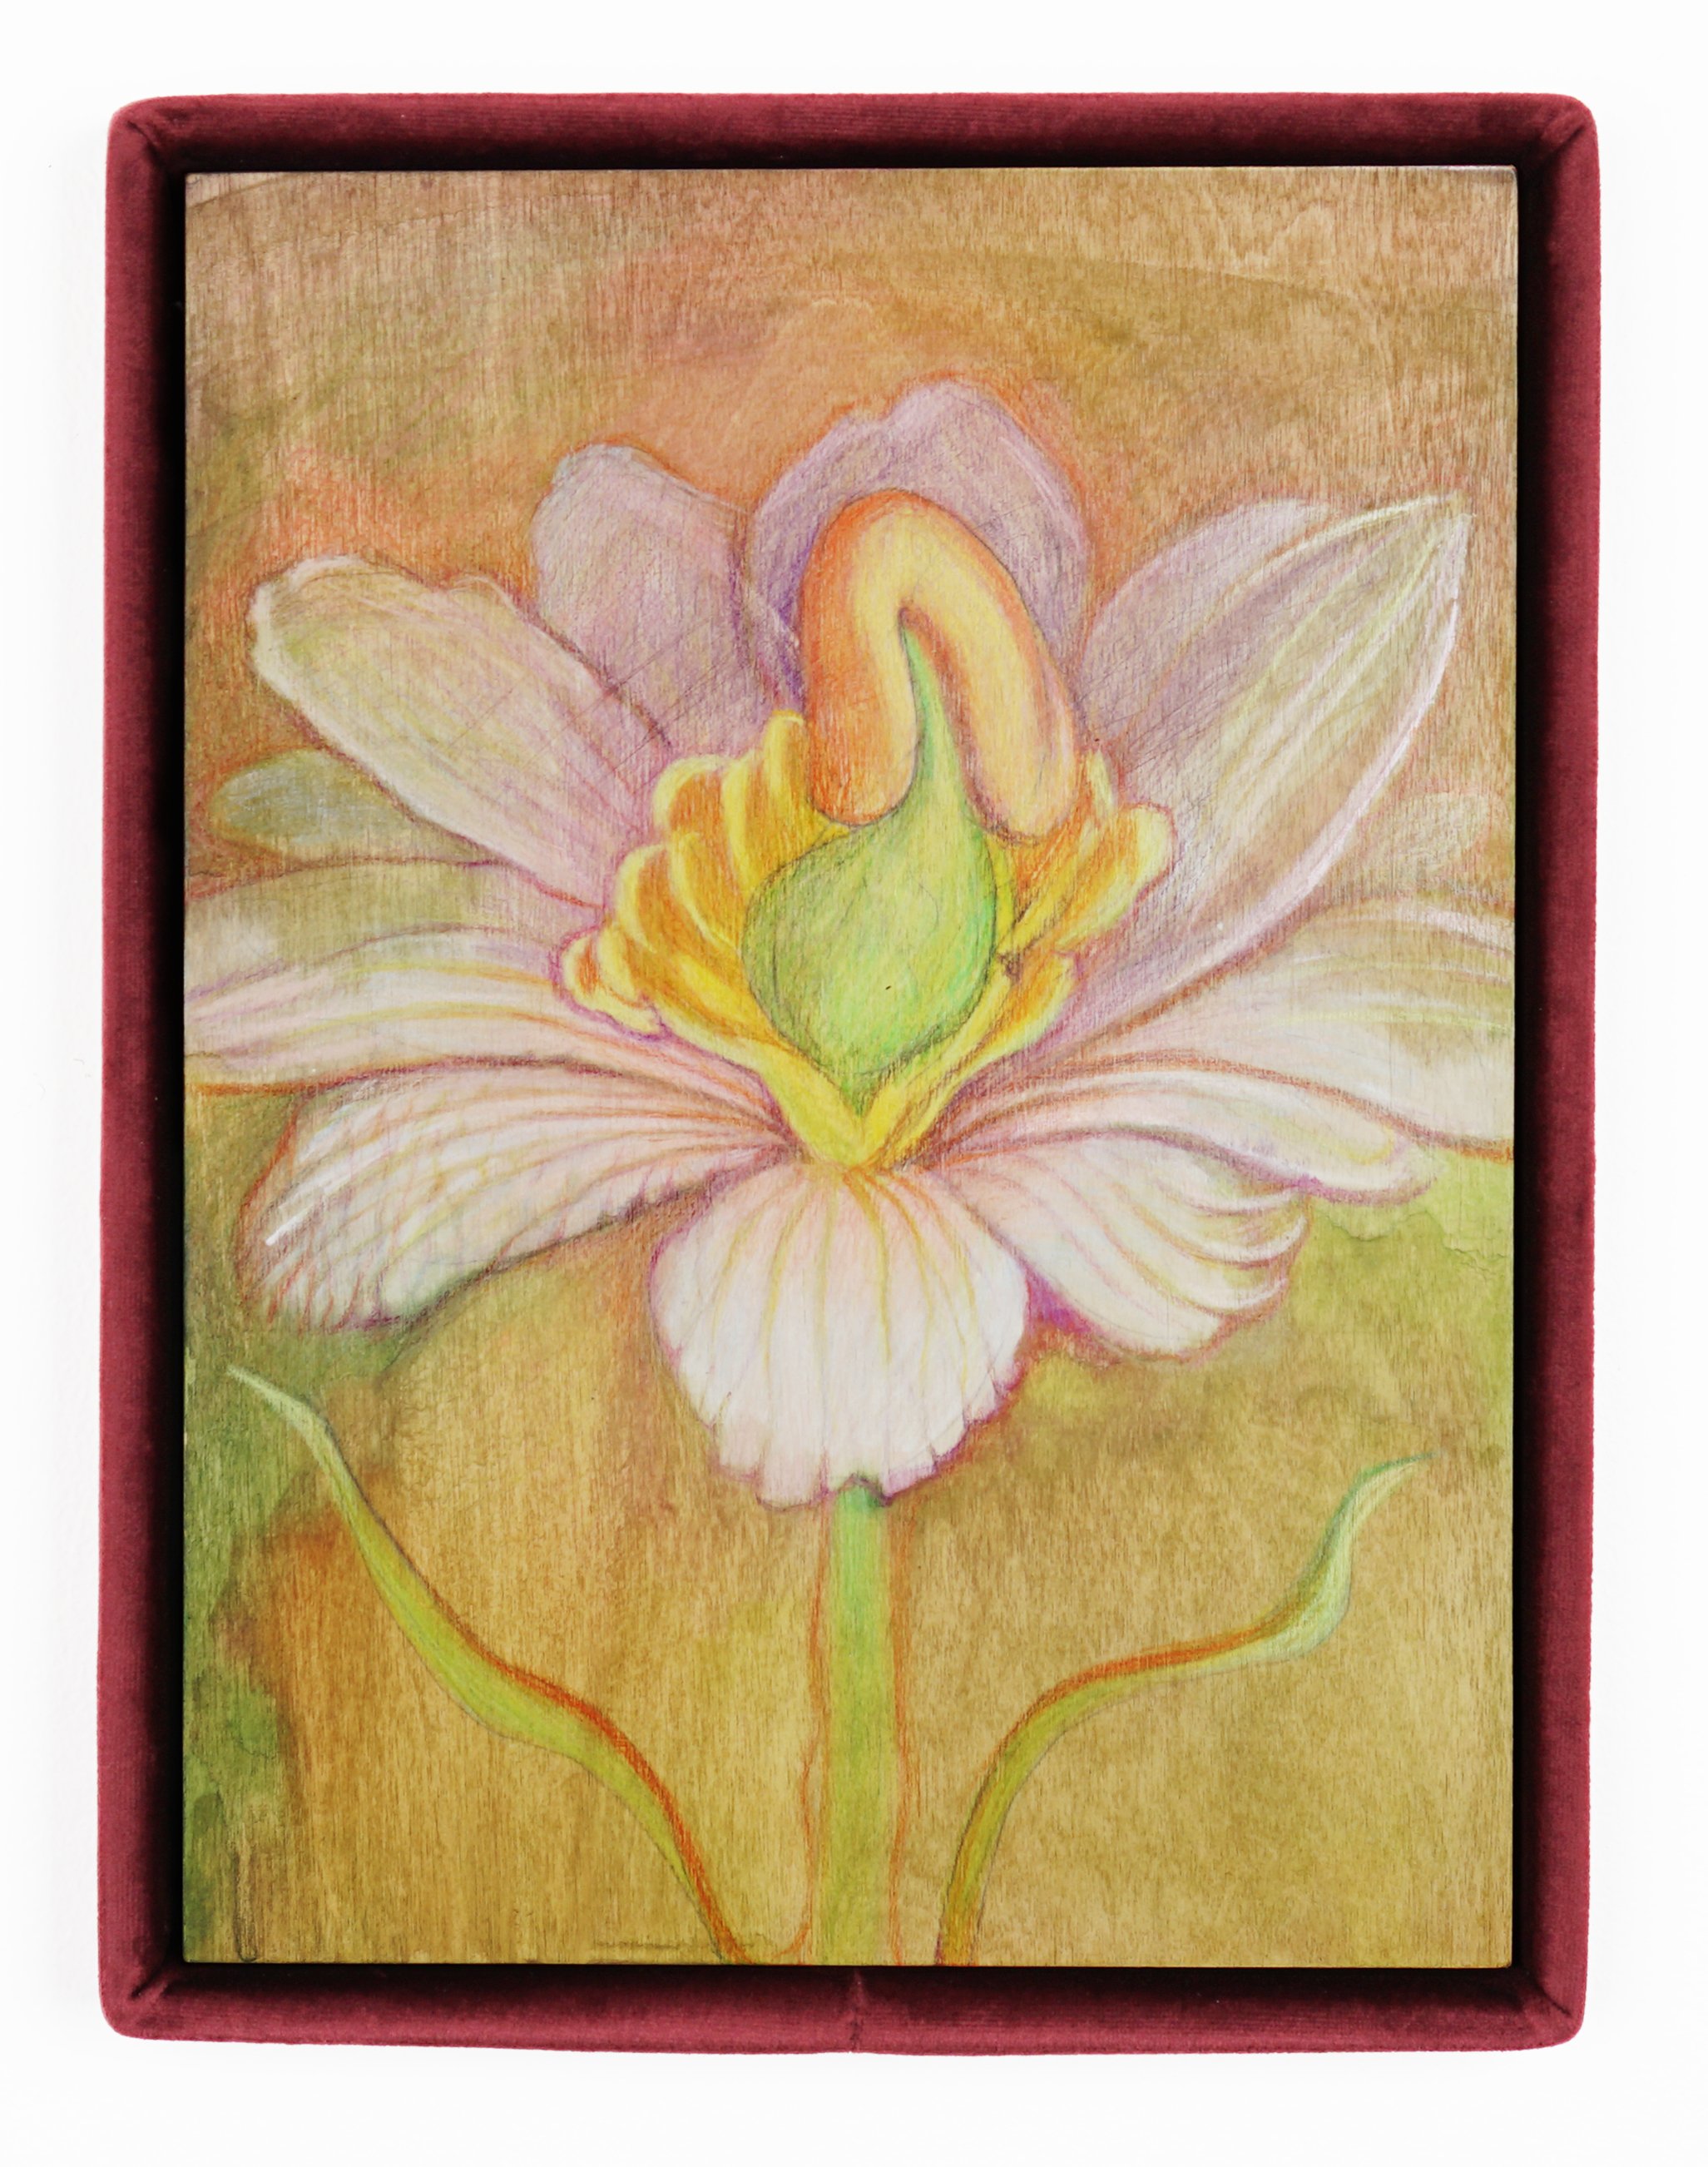  Alina Bliumis  Plant Parenthood, Bloodroot , 2023 Watercolor, watercolor pencil on wood panel, artist’s velvet frame 13.5 x 10.5 x 1.5 inches 